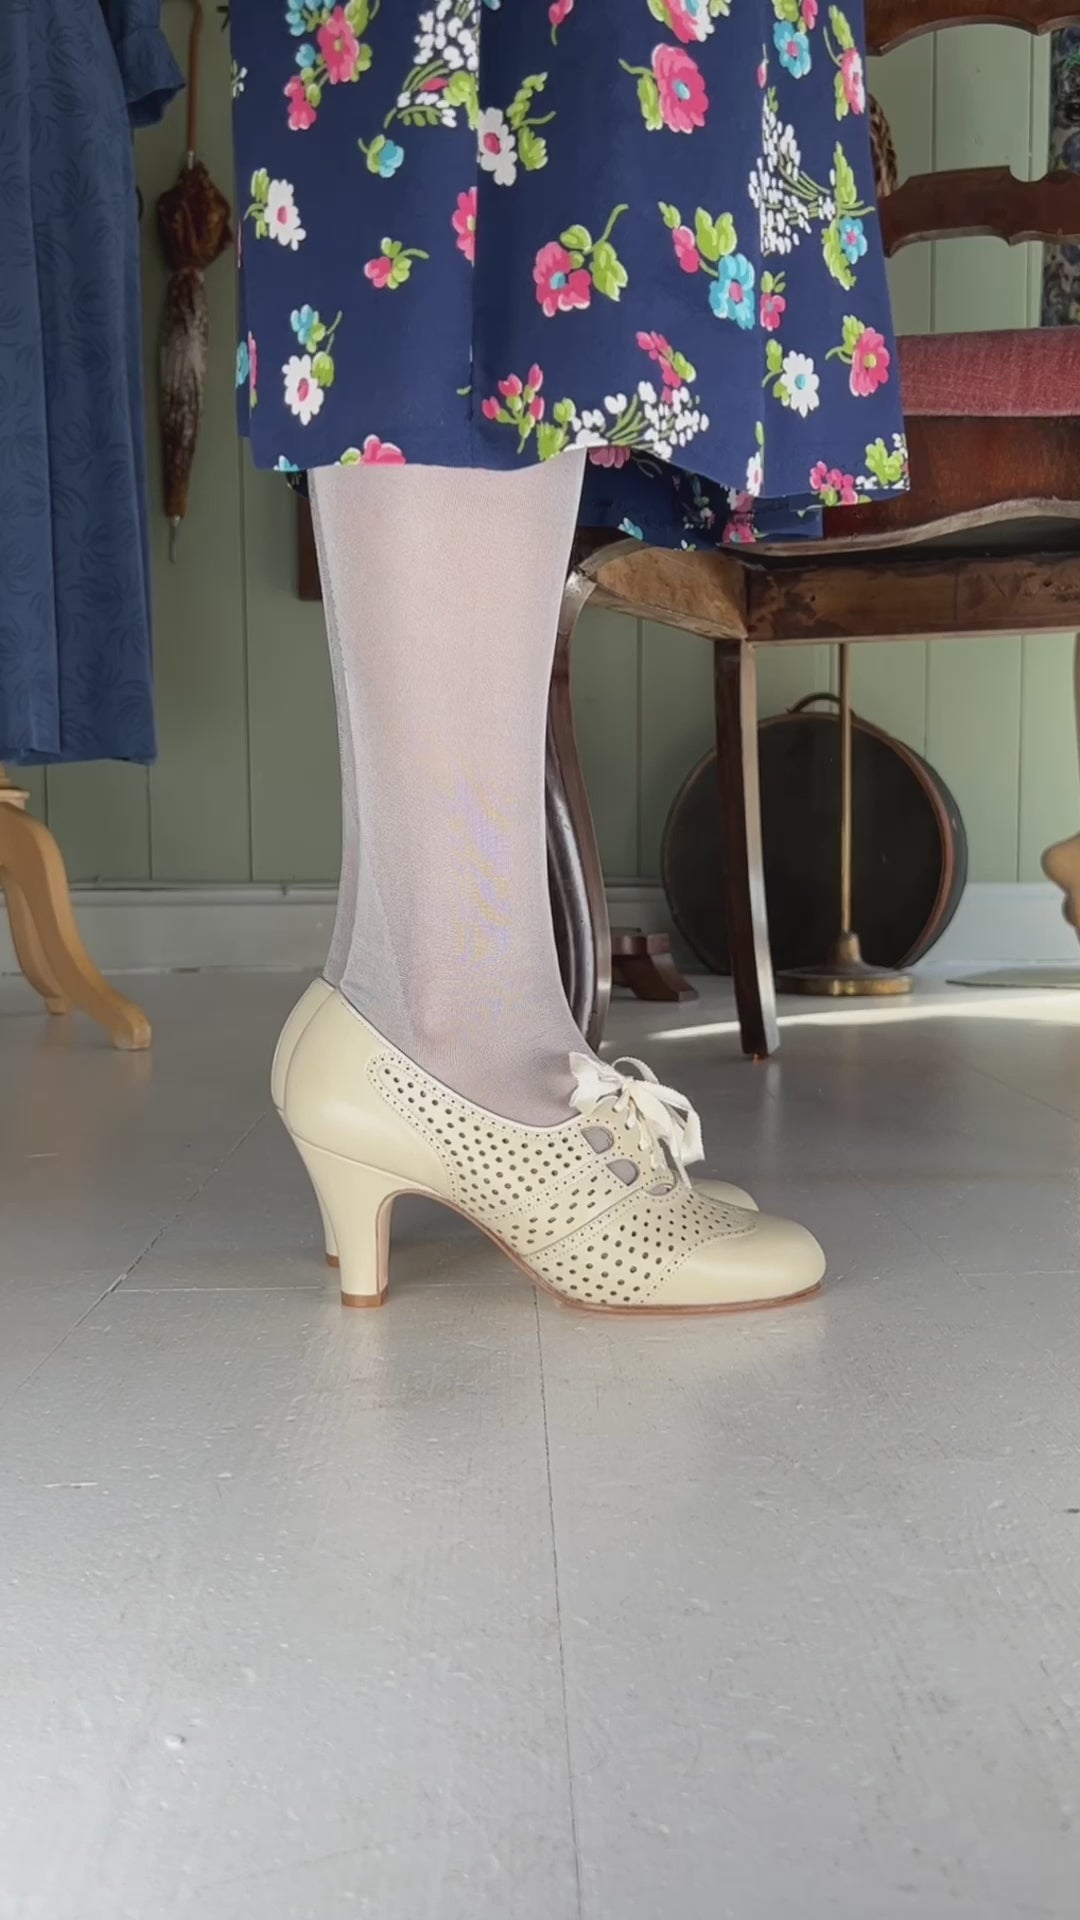 1930s everyday oxford high heel shoes - Cream - Marie